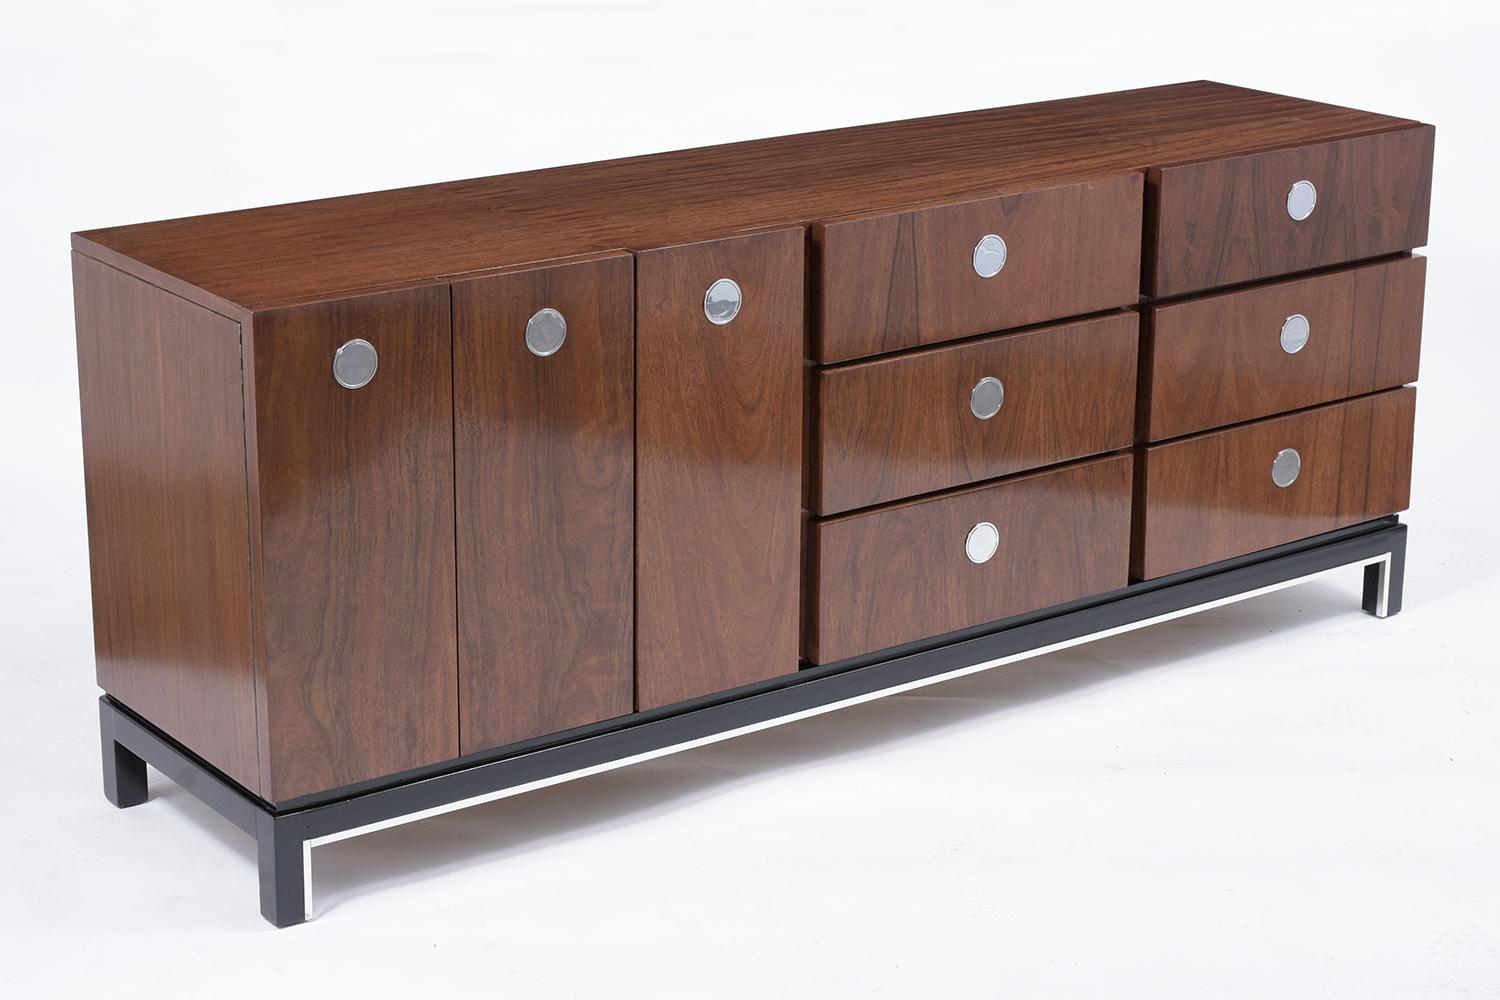 An elegant Mid-Century Modern walnut dresser has been professionally restored, is crafted out of walnut wood, and is newly stained in walnut and ebonized color combination with a lacquer finish. This credenza features six drawers on the left side